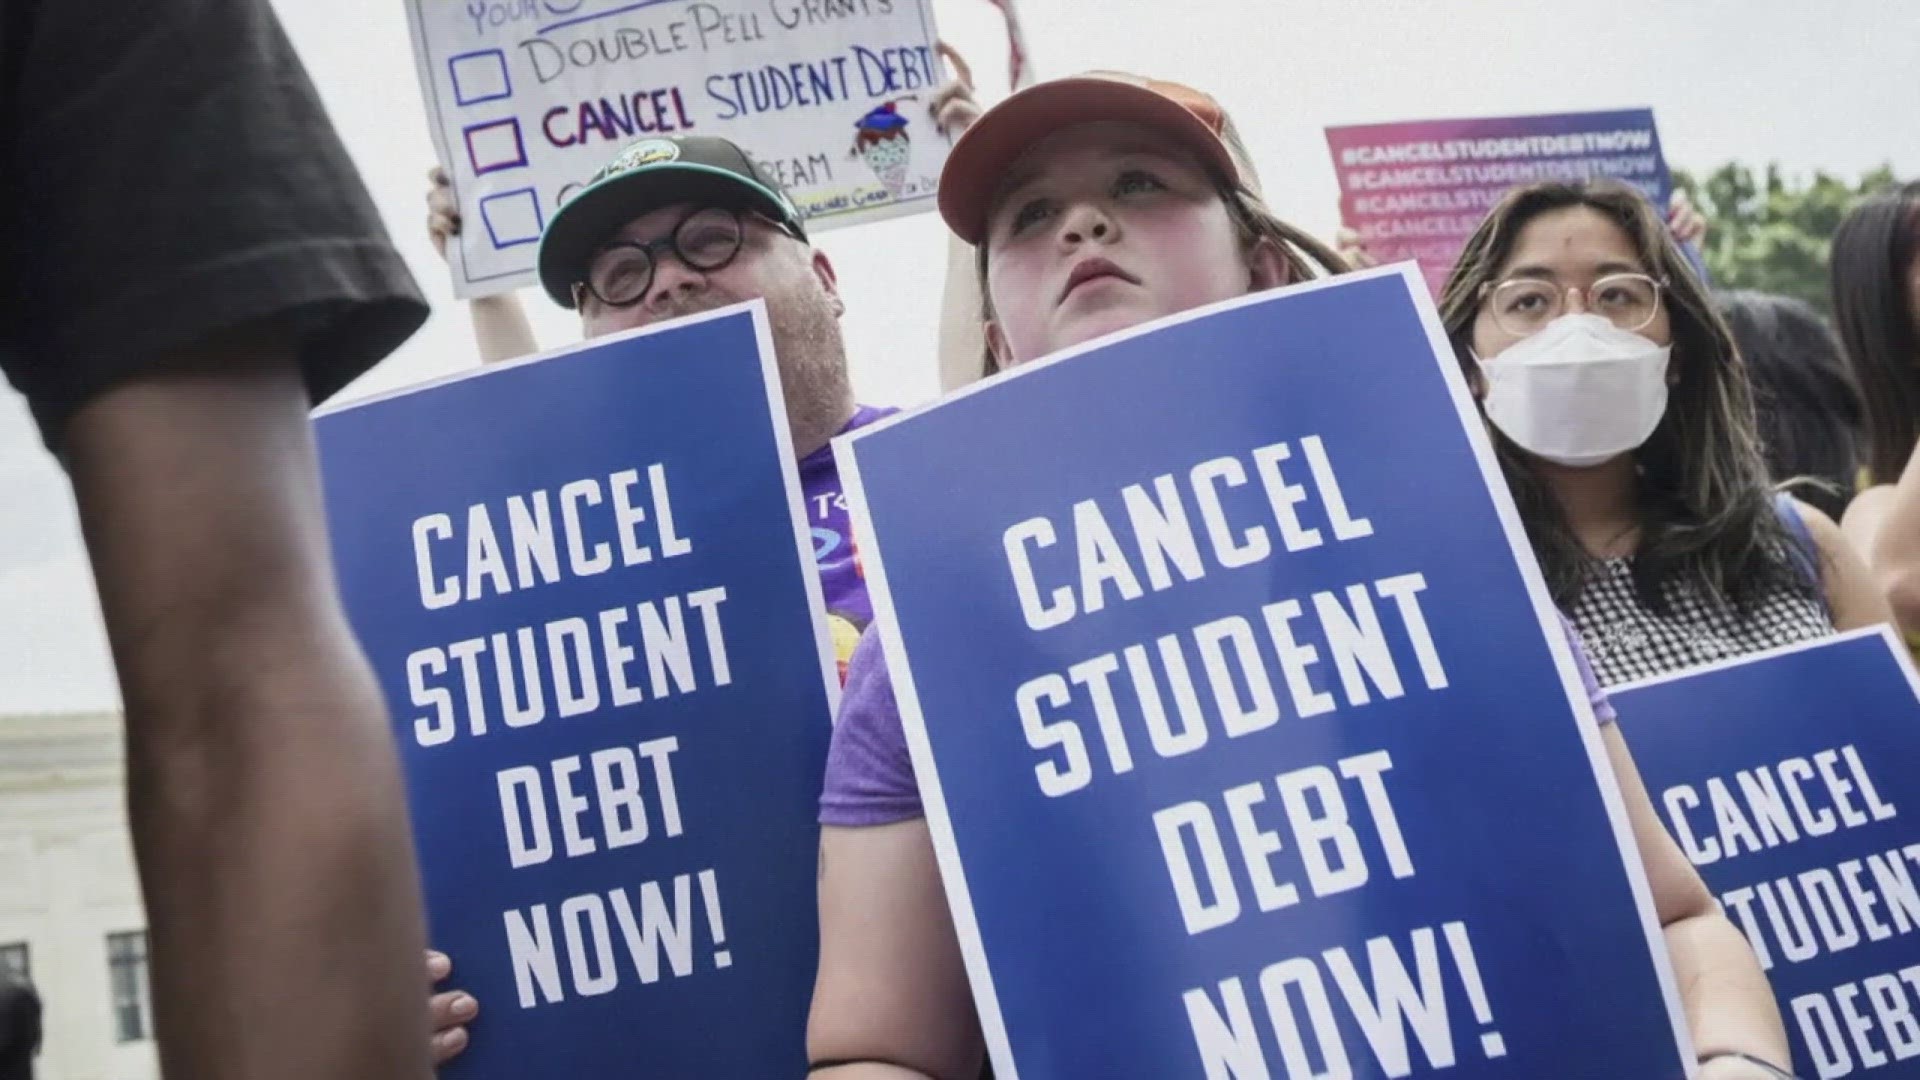 The Biden Administration is looking into a new student debt relief policy, but the plan is still months away from being finalized.